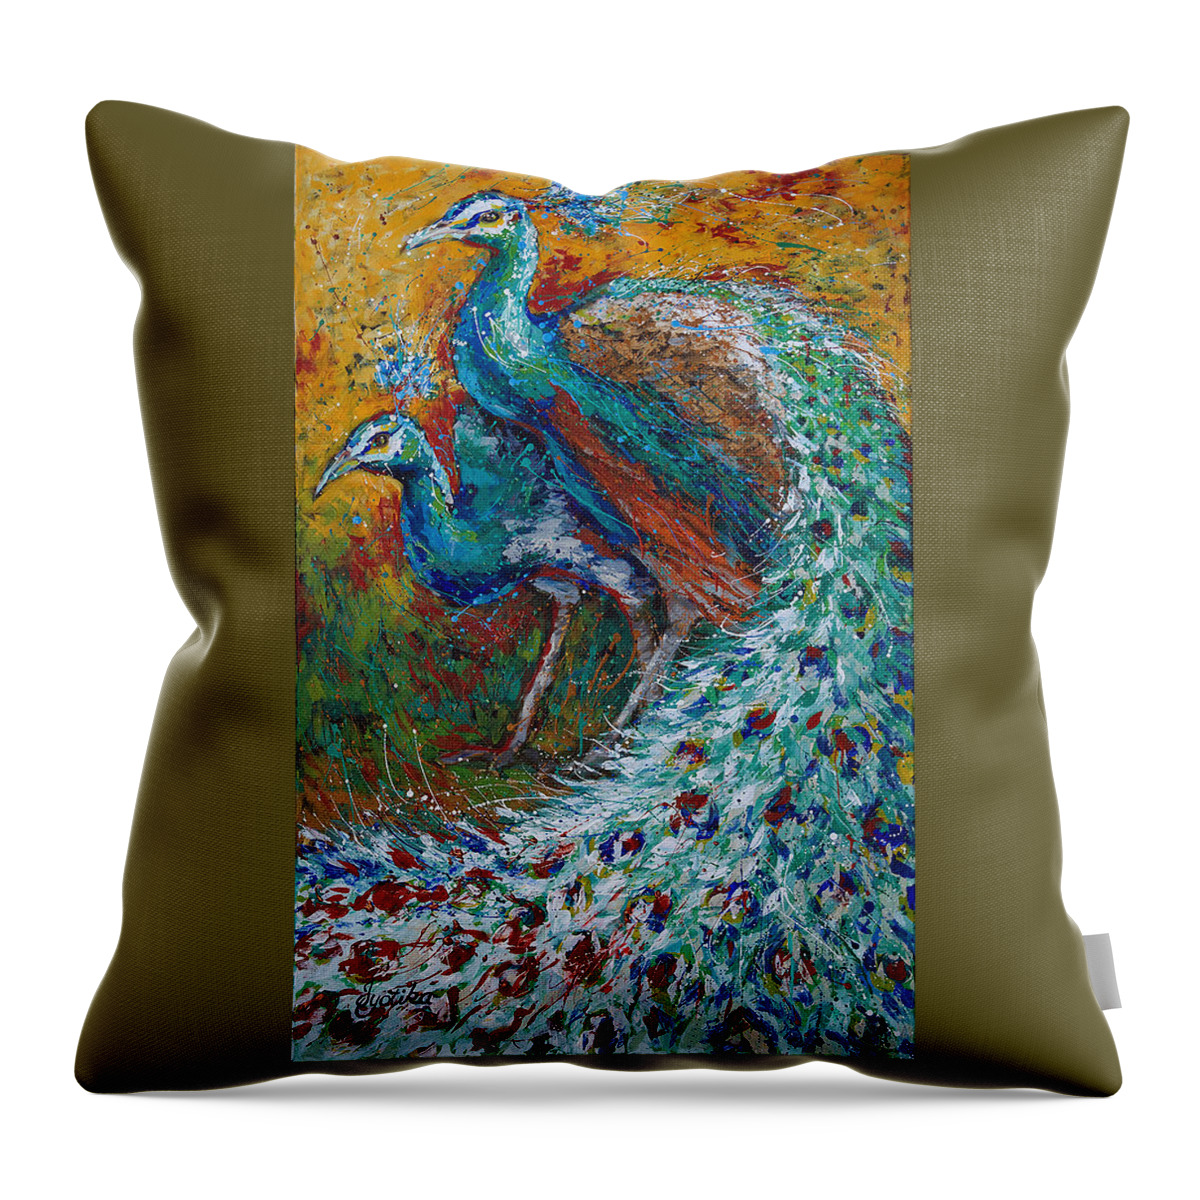 Peacock And Peahen Throw Pillow featuring the painting Harmonious by Jyotika Shroff